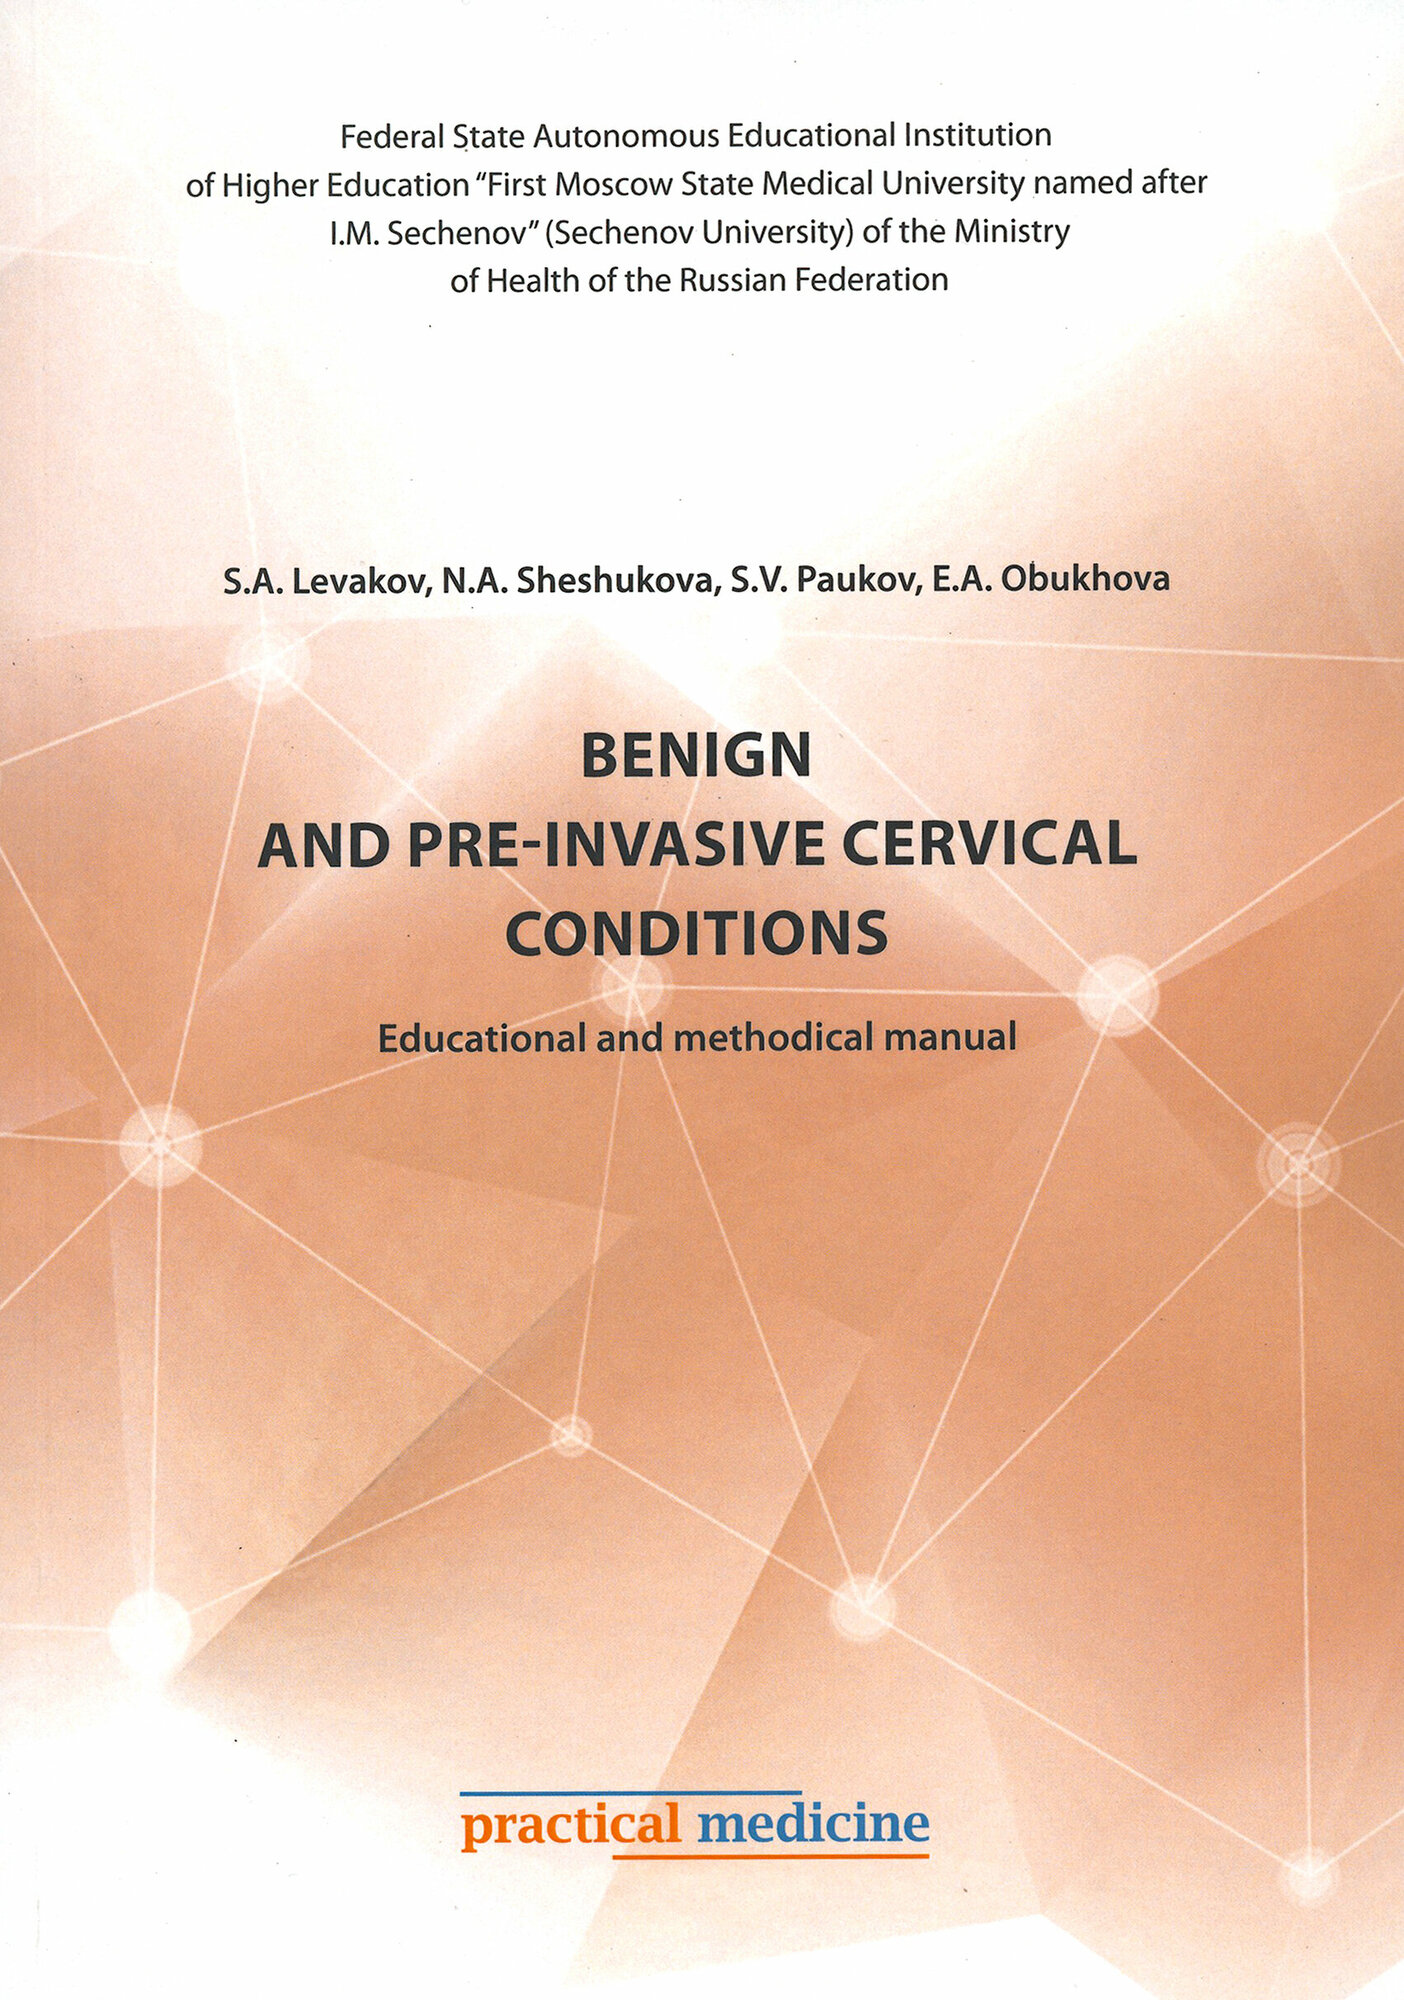 Benign and pre-invasive cervical conditions. Educational and methodical manual - фото №2